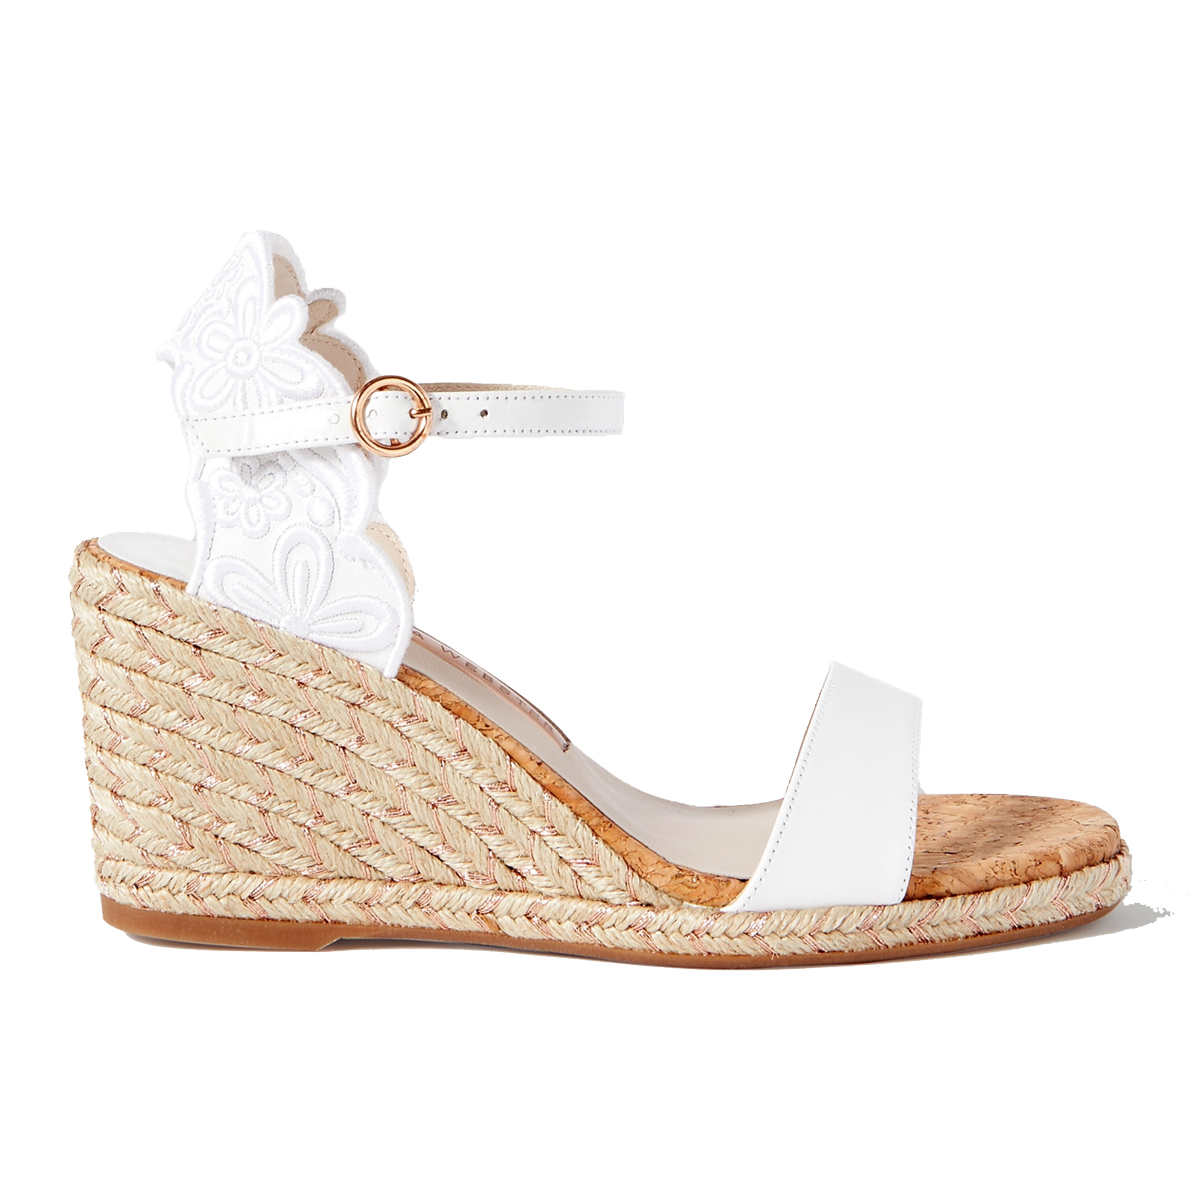 Shop 4 Different Styles of Espadrilles Perfect for Summer - Coveteur